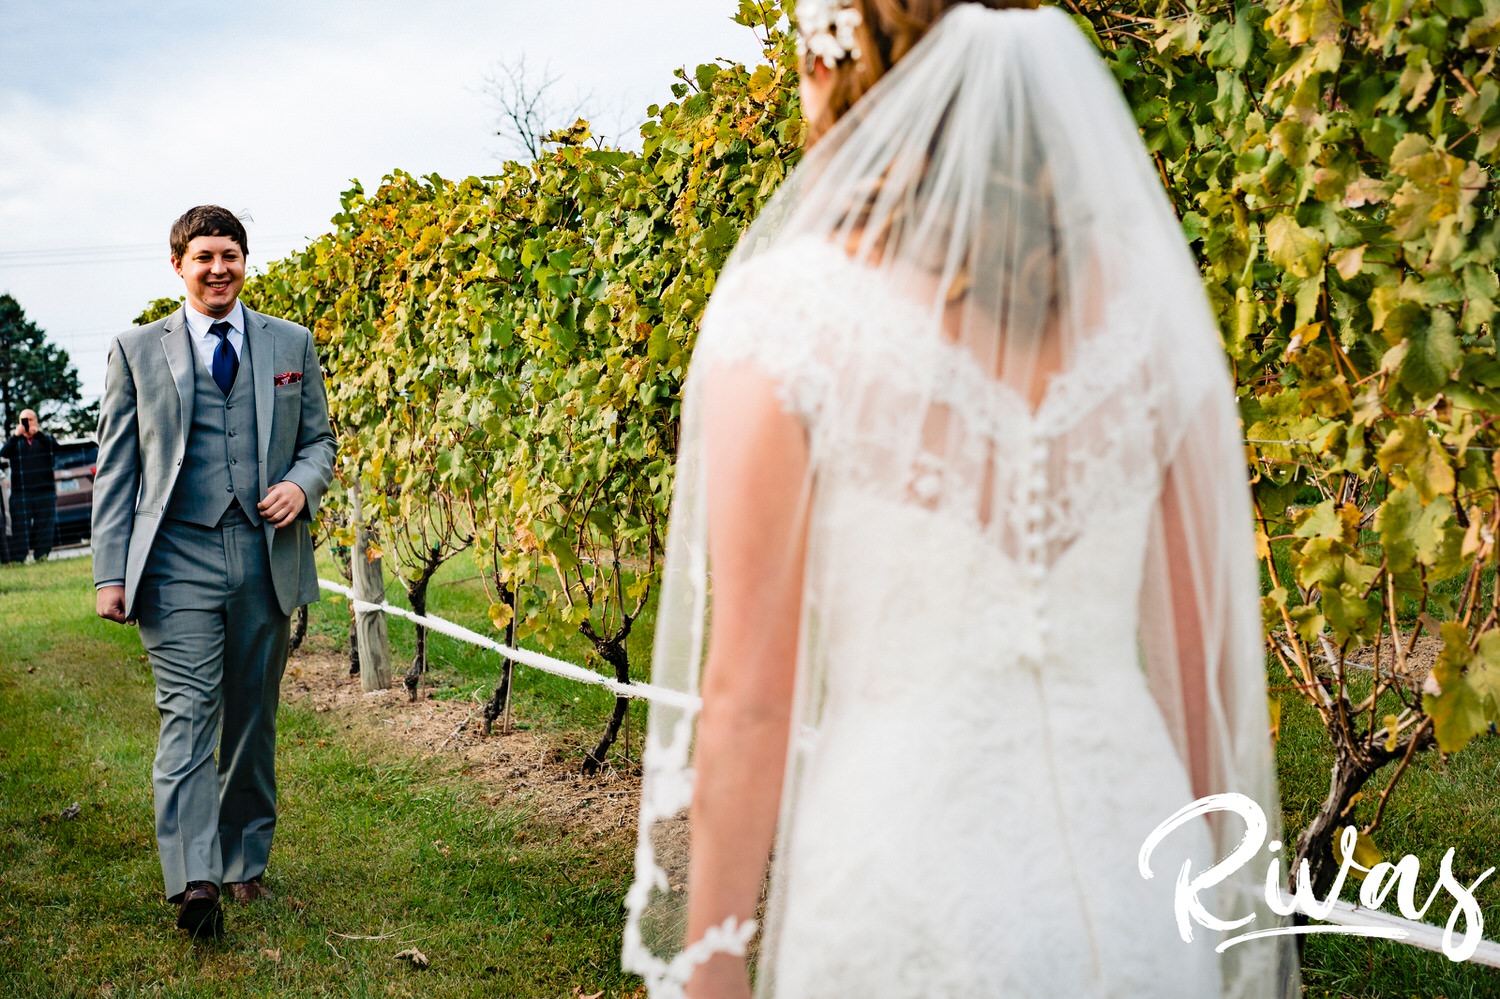 A colorful, candid picture of a groom walking towards his bride in the middle of a vineyard for their first look on the afternoon of their fall wedding day at The Barns at Hamilton Station Vineyard. 